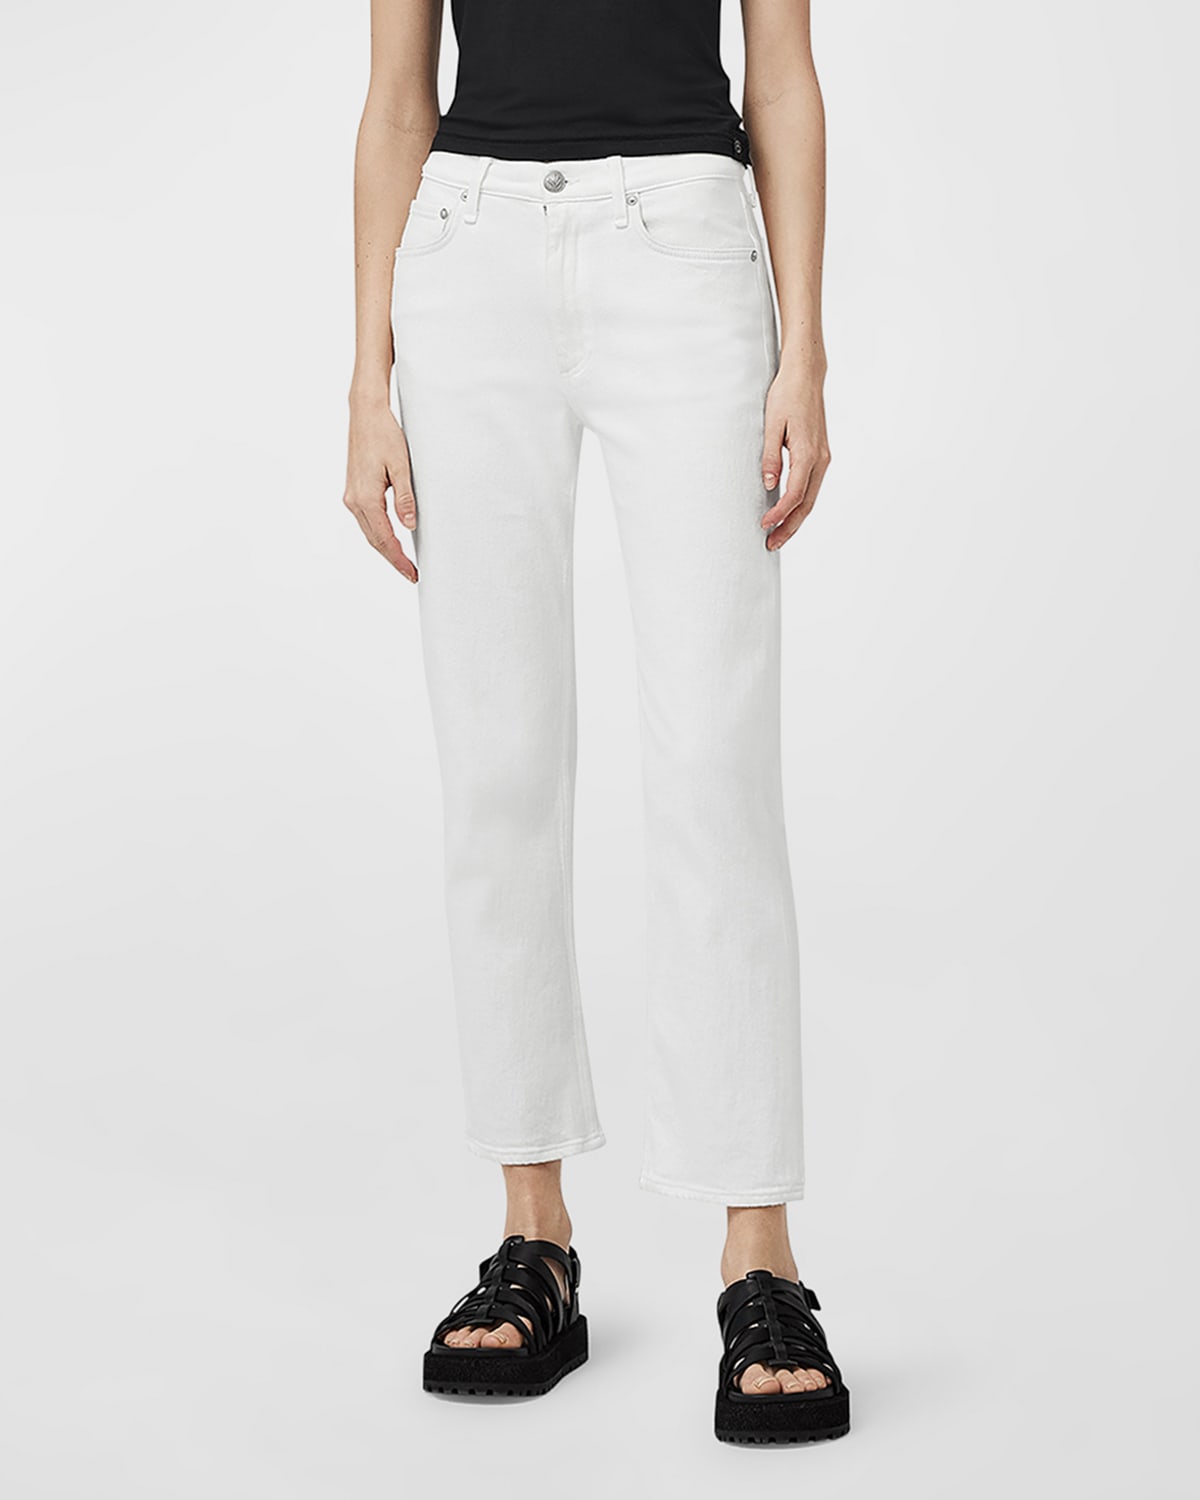 RAG & BONE HARLOW MID-RISE STRAIGHT ANKLE JEANS 